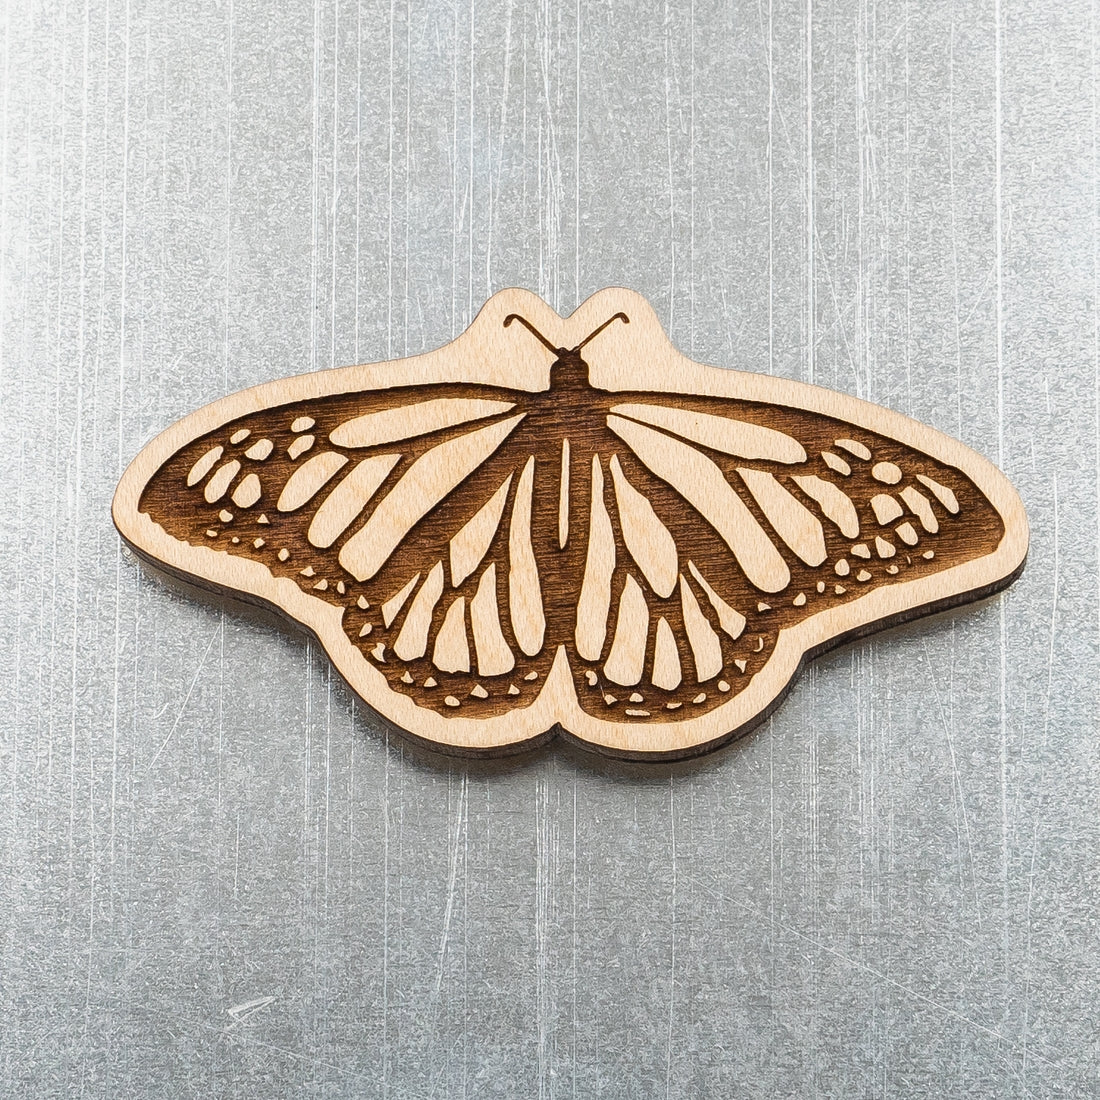 Monarch Butterfly Sustainable Wood Magnet